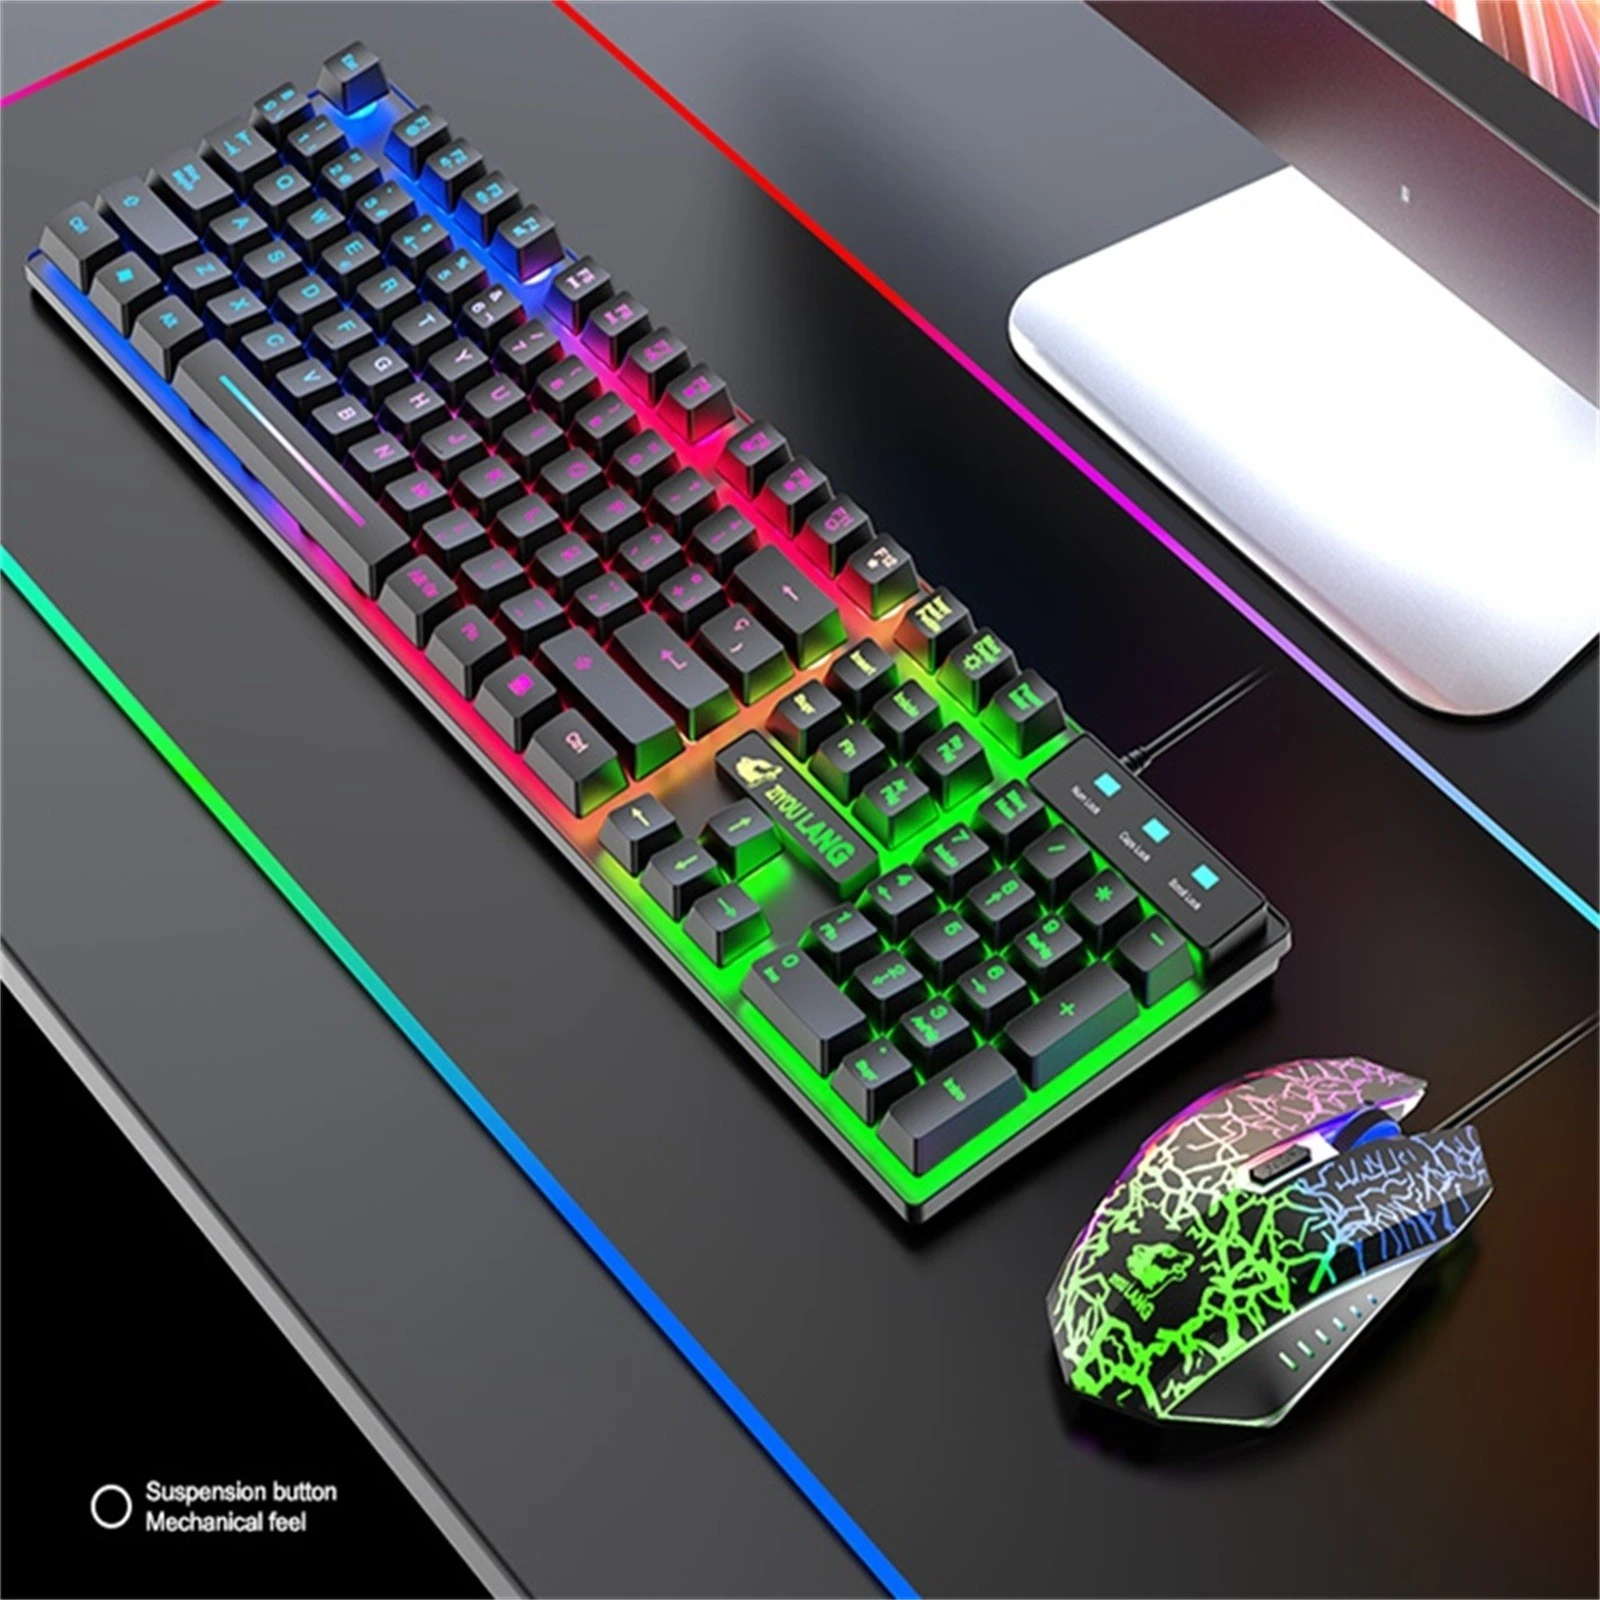 Vruchtbaar Smederij shuttle T13 Rgb Spanish Gaming Keyboard And Mouse With 104-key Backlit Qwerty  Keyboard Gaming Laptop Accessories - Keyboards - AliExpress